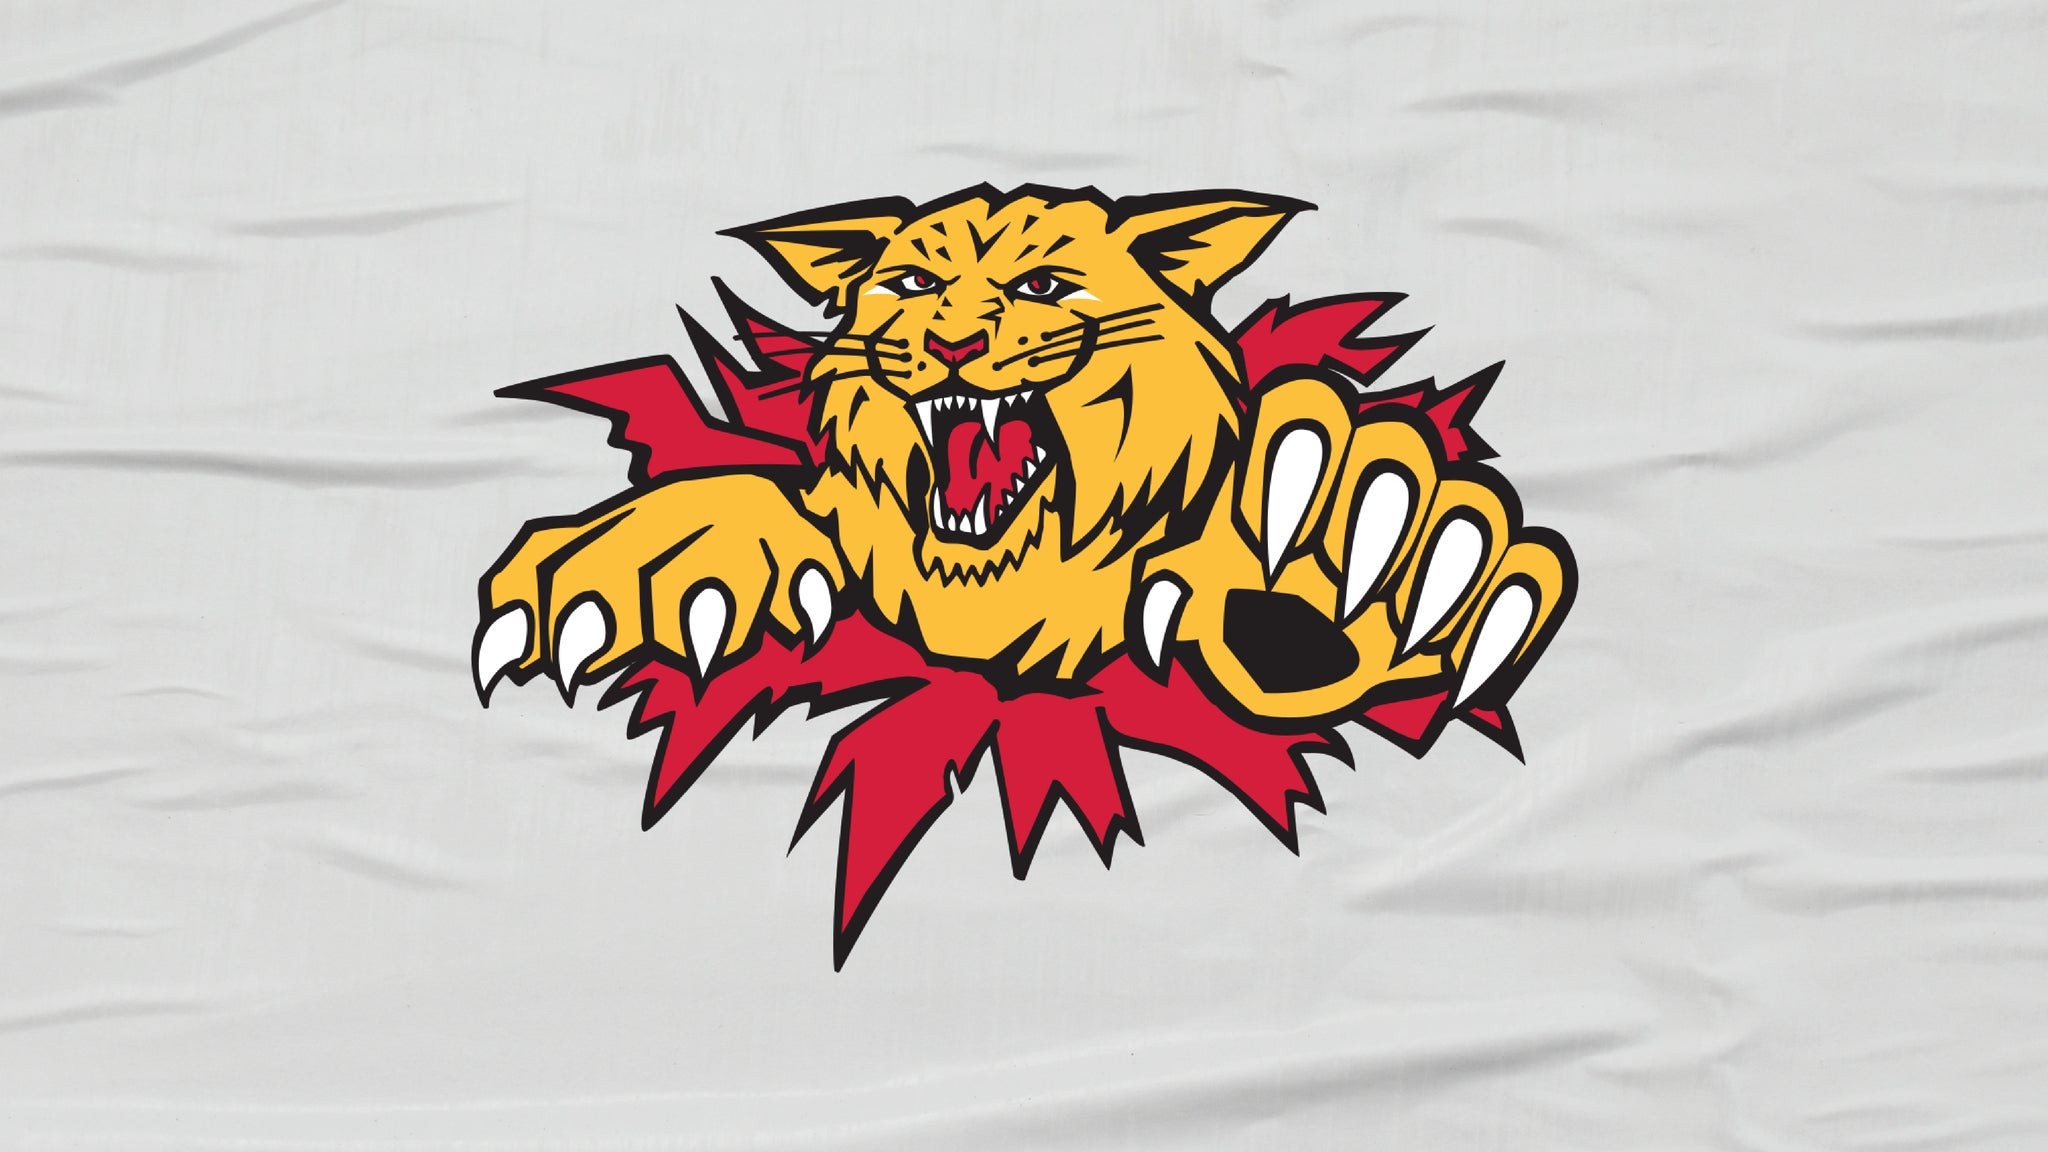 Moncton Wildcats vs. Saint John Sea Dogs in Moncton promo photo for Hotels $3 off promo presale offer code